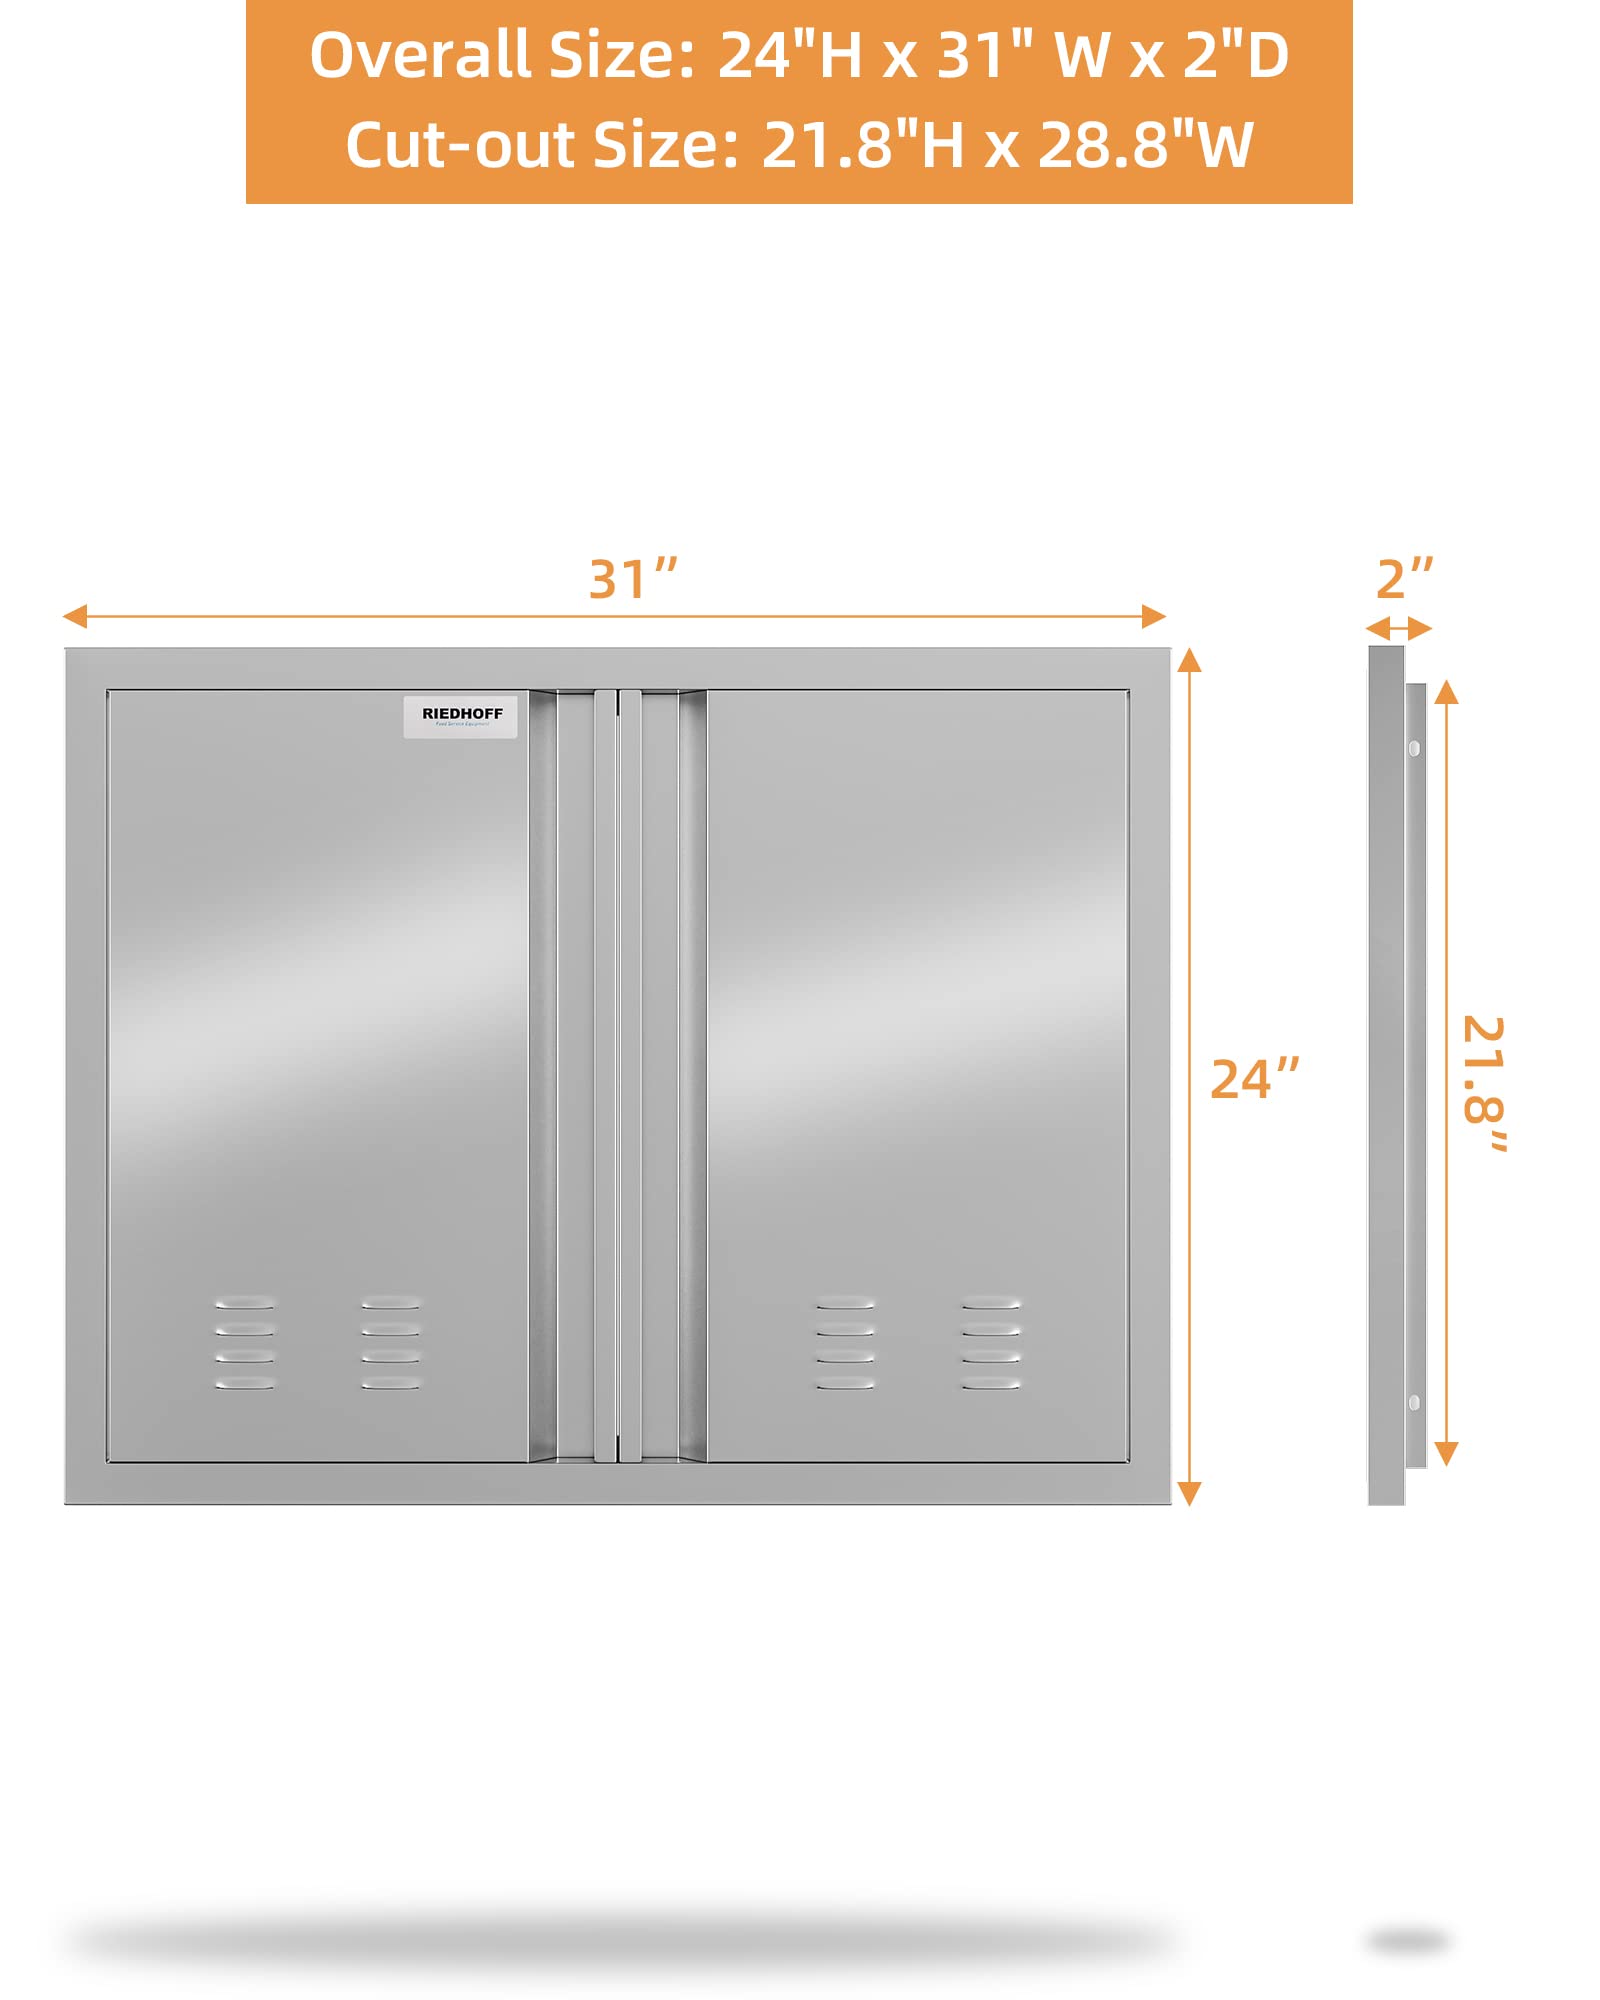 HA-EMORE 304 Stainless Steel Outdoor Kitchen Access Door with Recessed Handle, Double Access Door for BBQ Island, Grilling Station - image 2 of 8